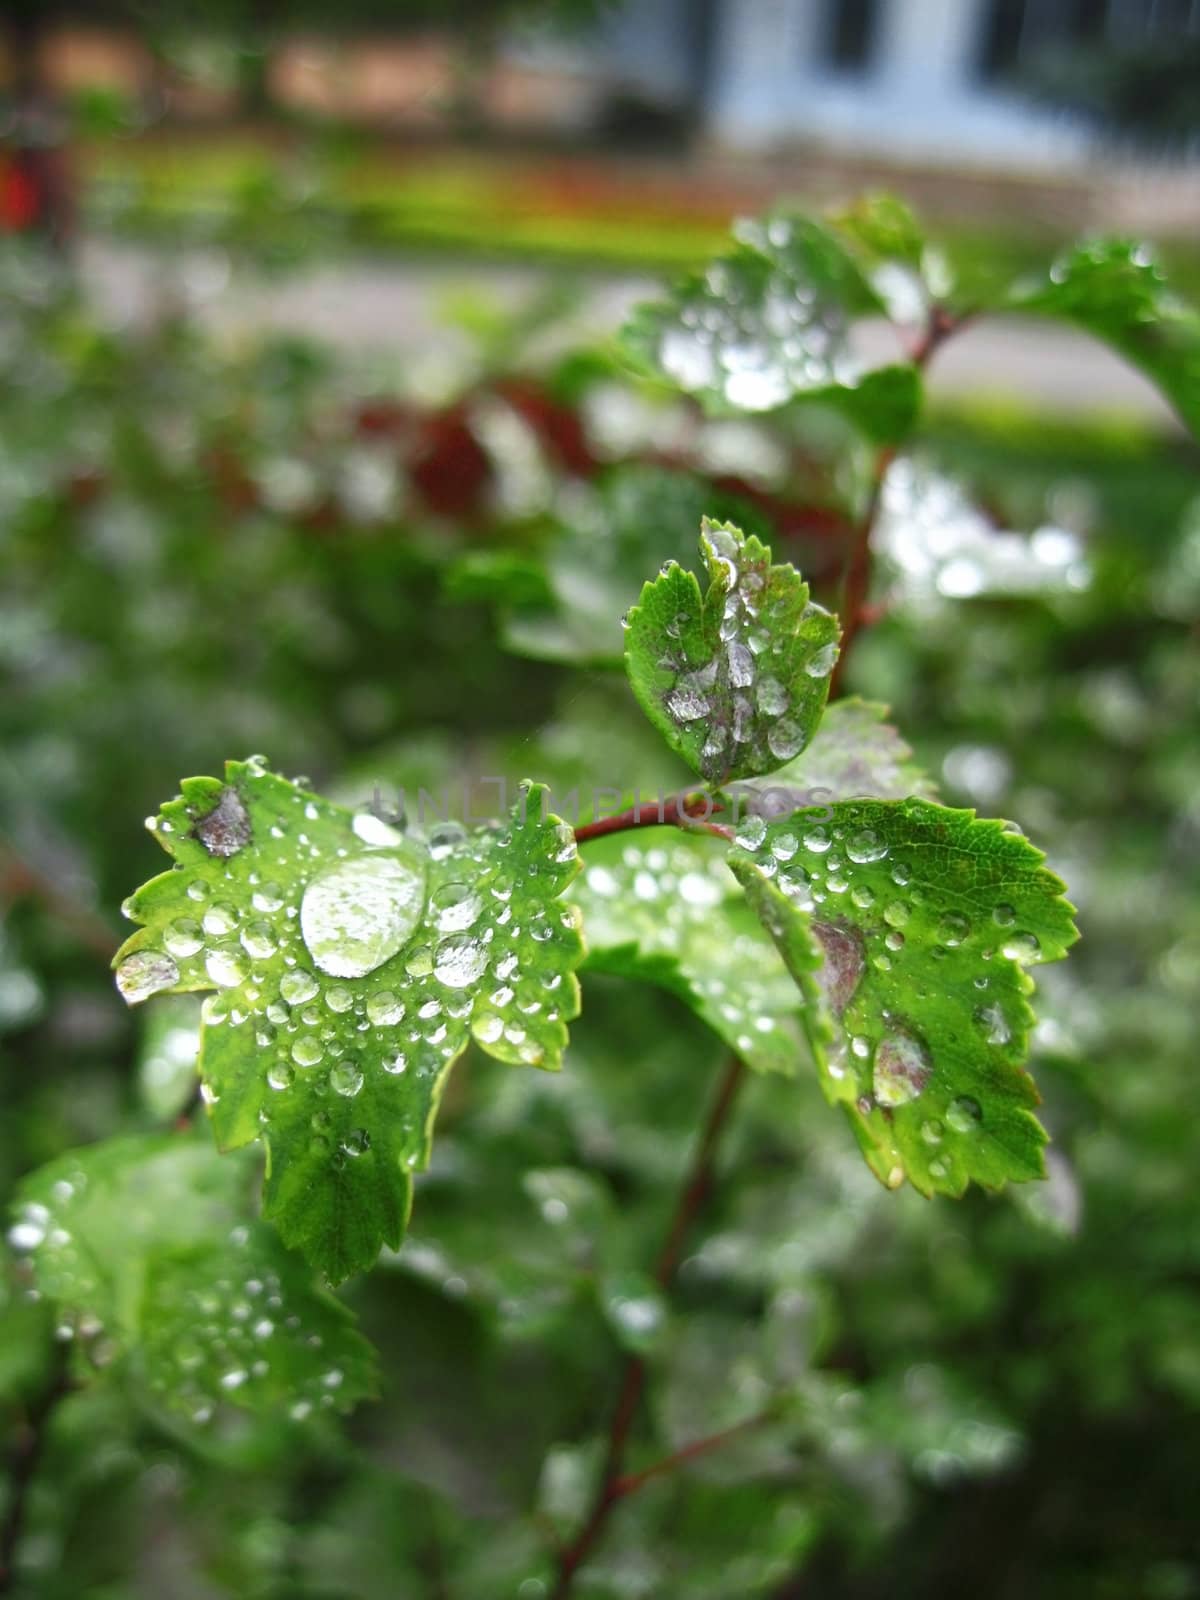 Green plant growth and dew over after rain by scullery